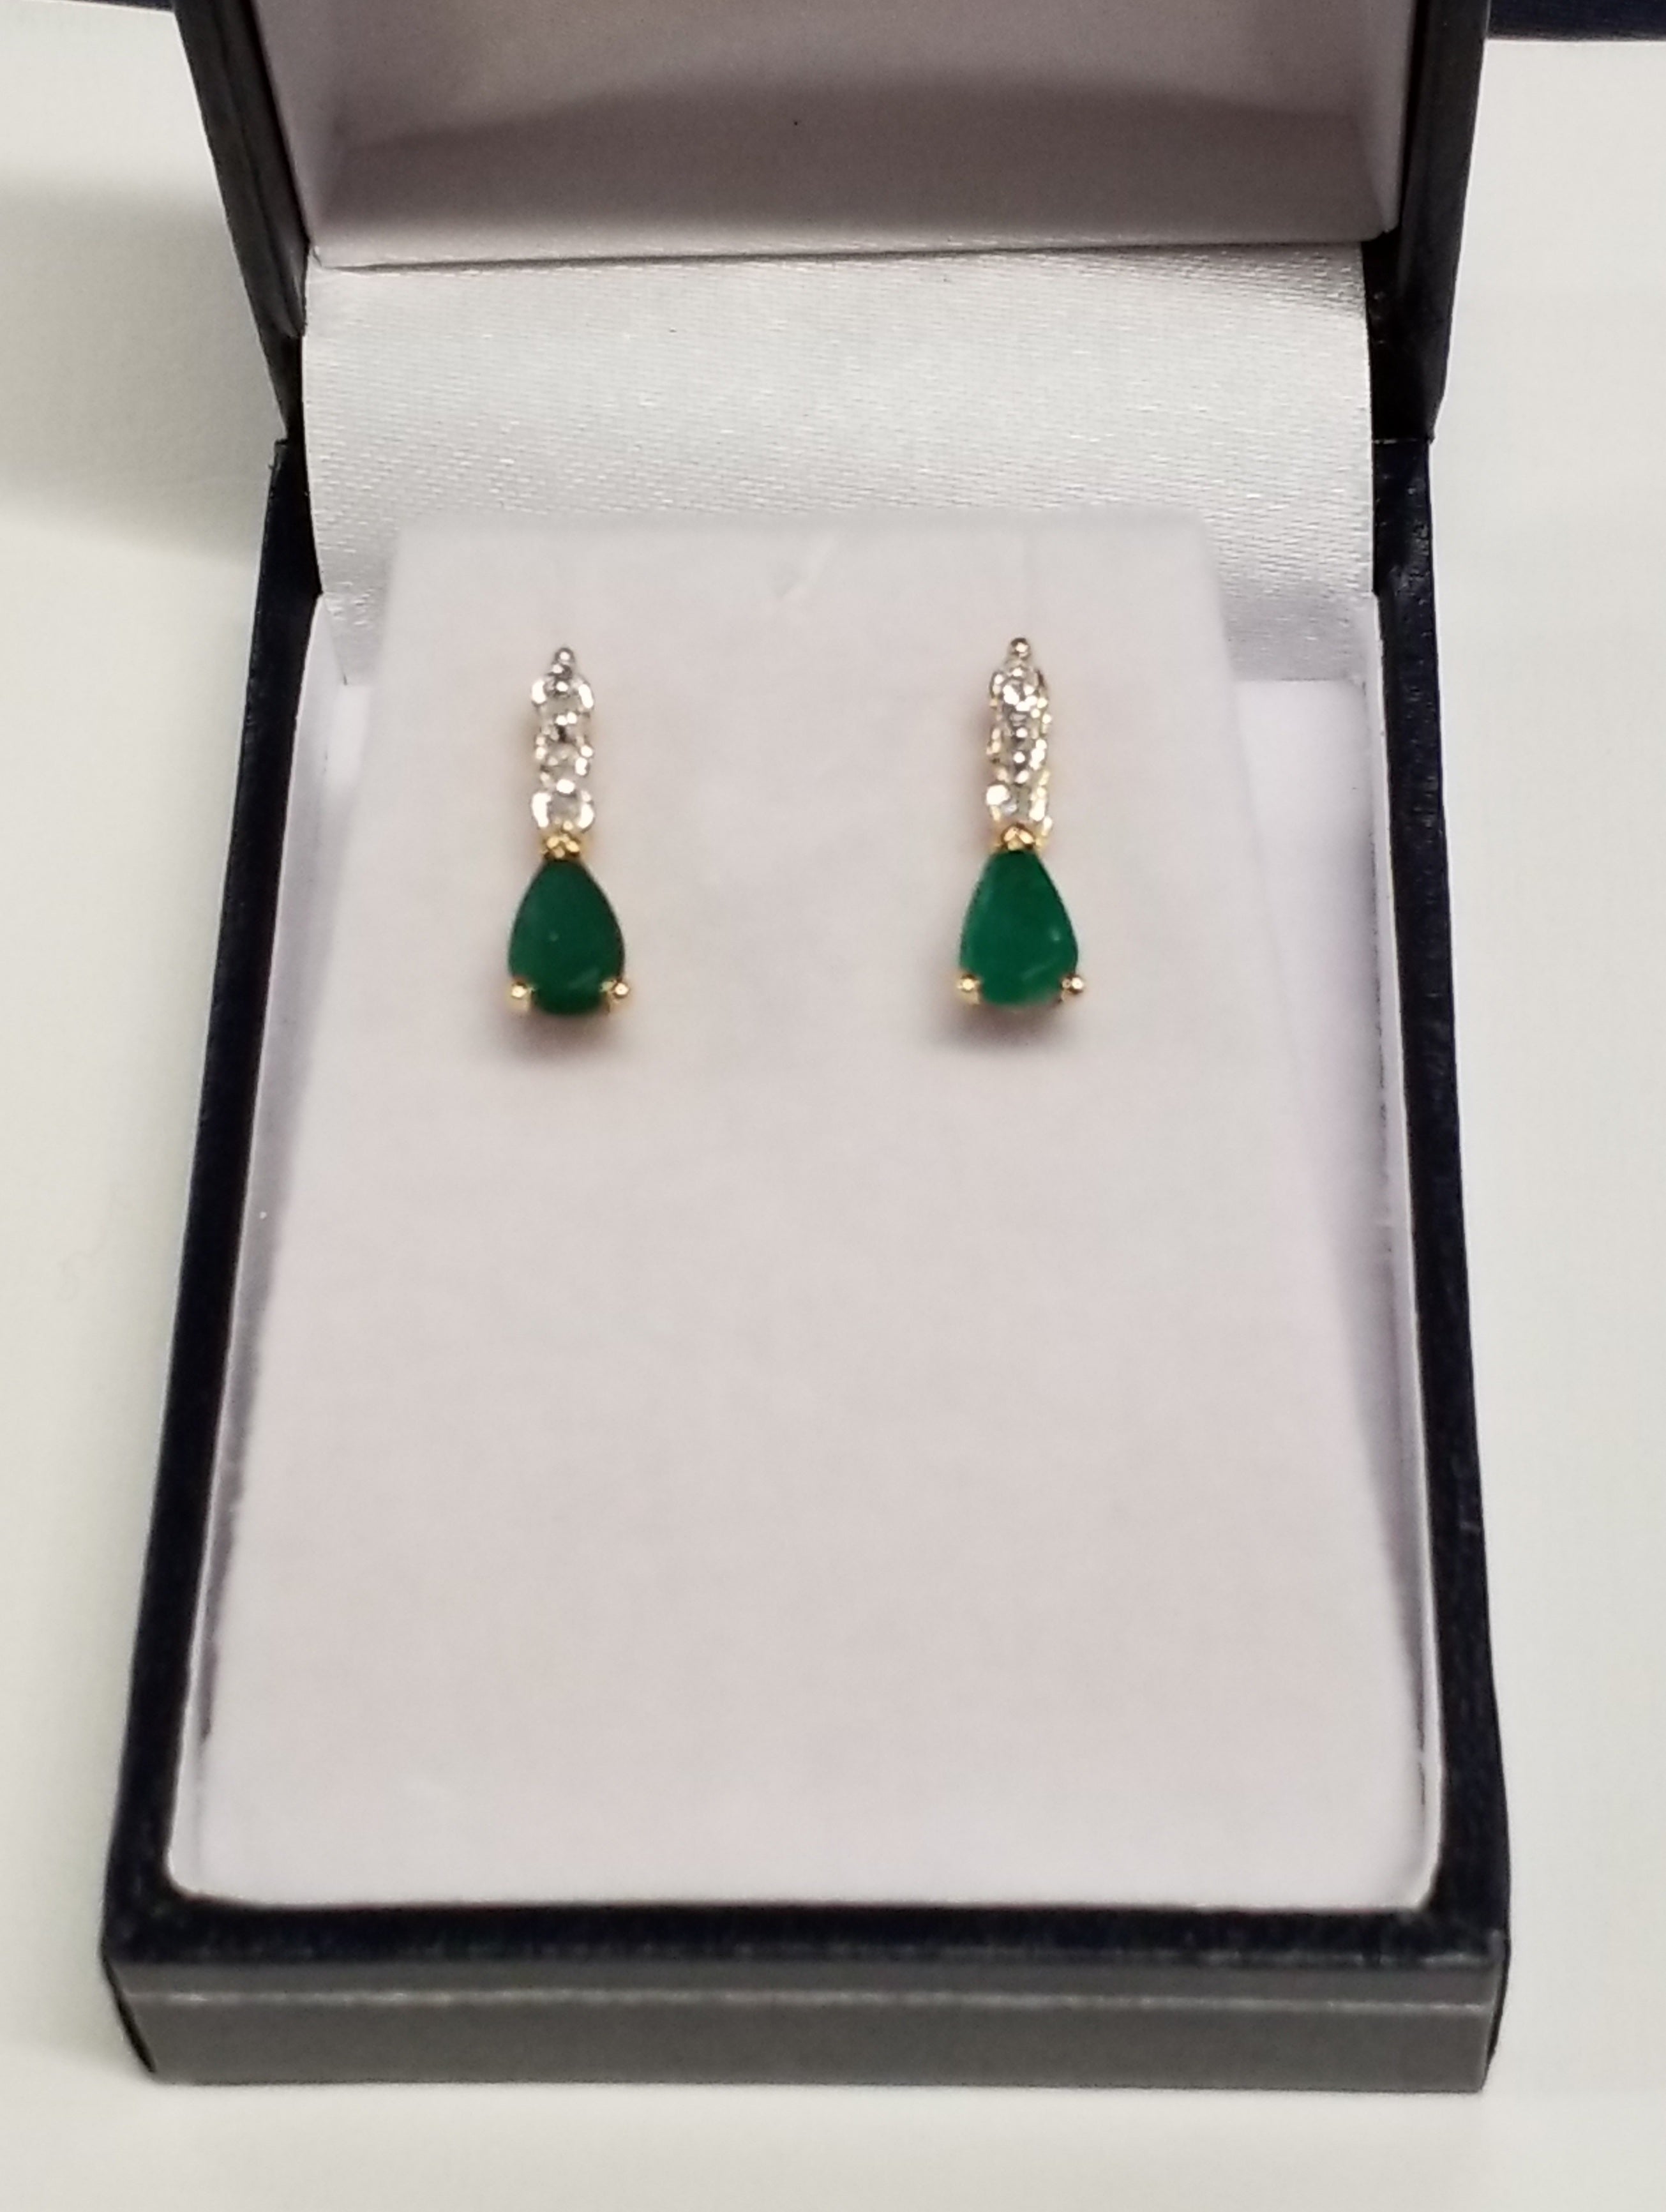 Two Pear Shaped Cut Emerald Earrings with Diamond Accents